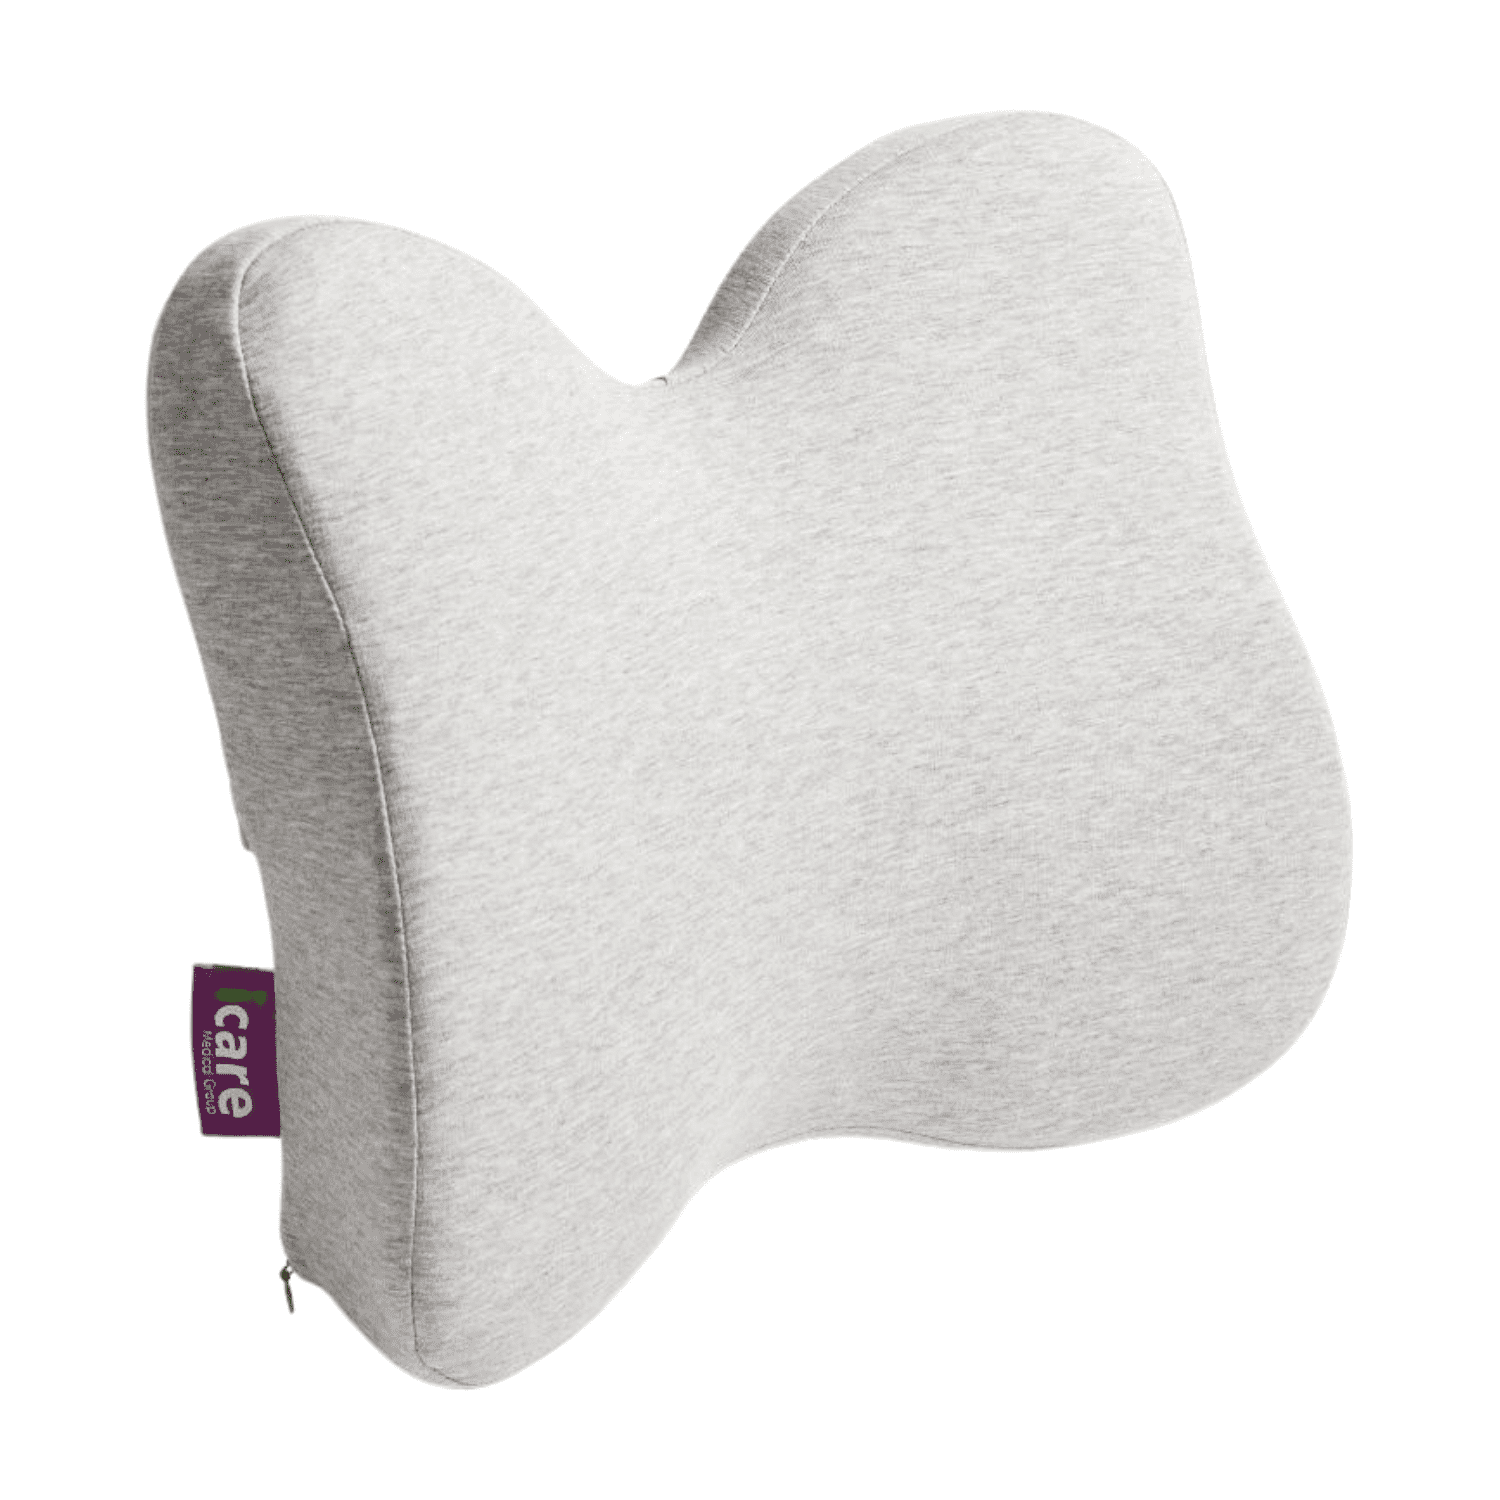 iCare Reform Low Back Support Cushion